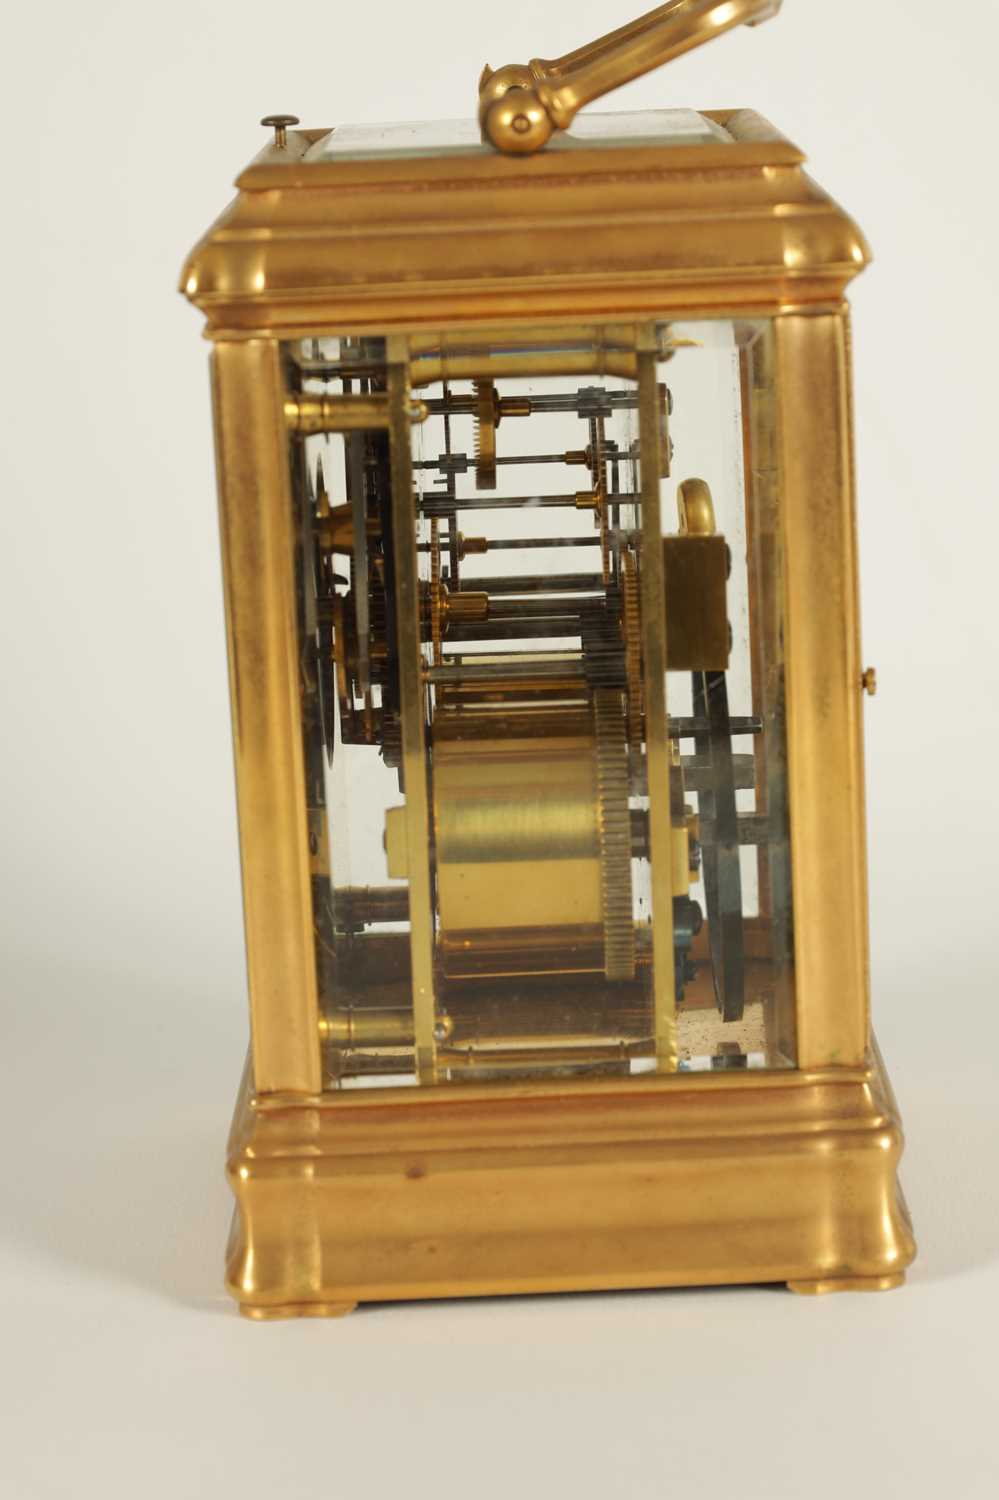 A LATE 19TH CENTURY FRENCH GILT BRASS GORGE-CASED REPEATING CARRIAGE CLOCK - Image 4 of 8